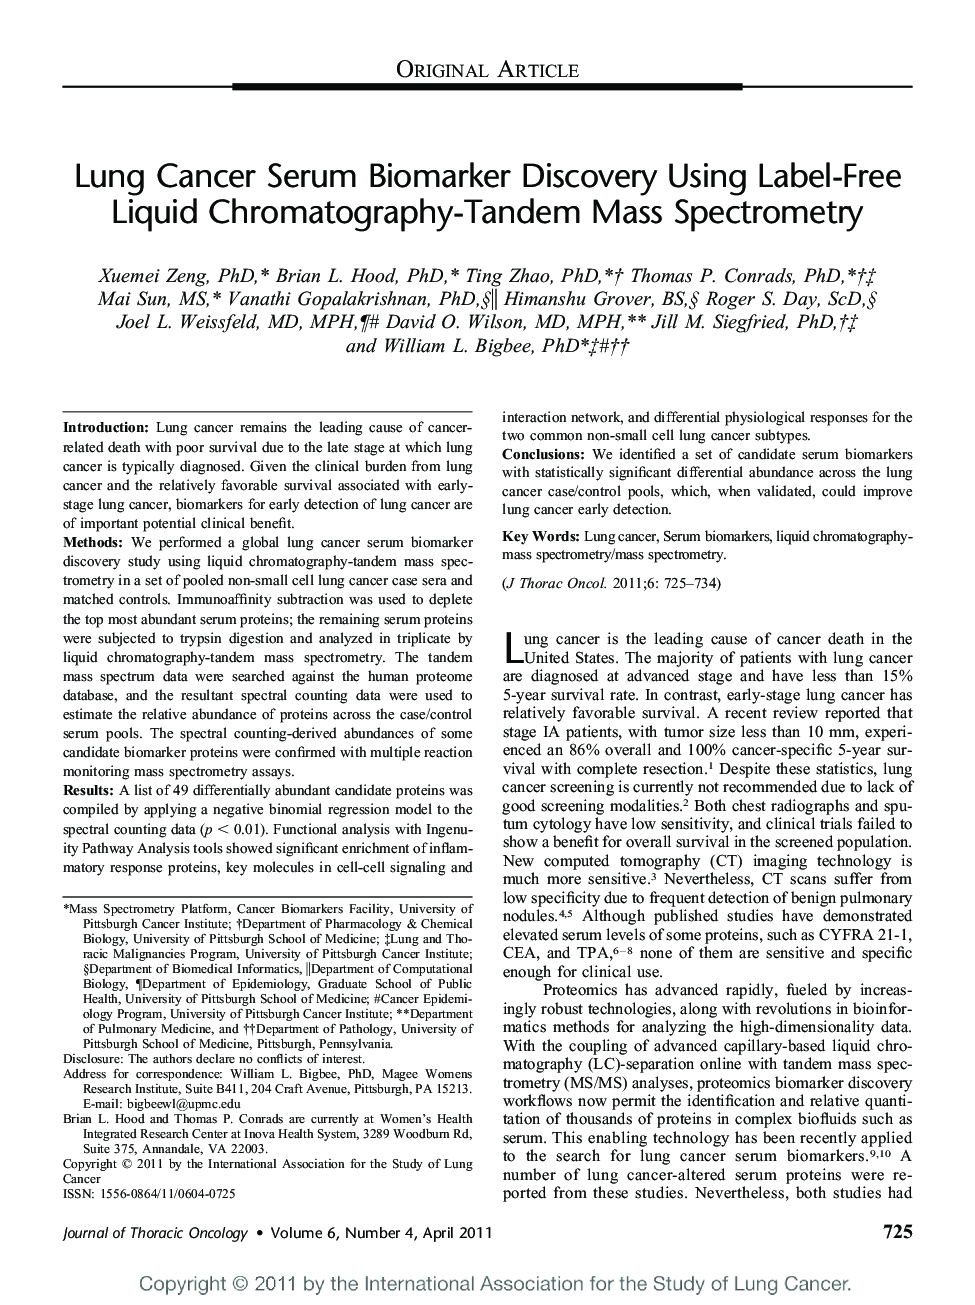 Lung Cancer Serum Biomarker Discovery Using Label-Free Liquid Chromatography-Tandem Mass Spectrometry 